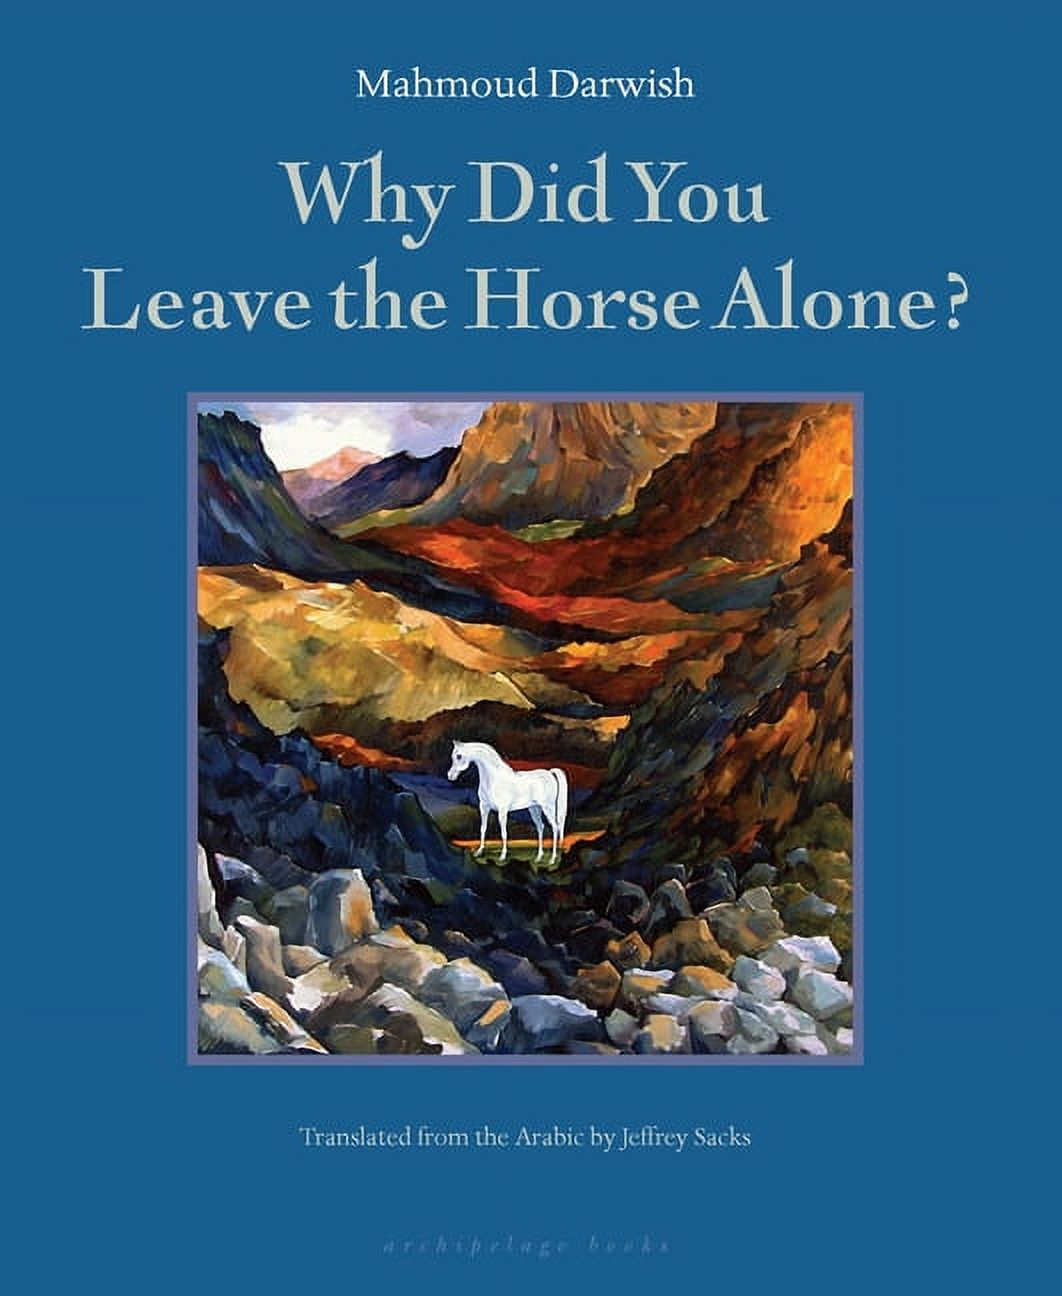 Why Did You Leave the Horse Alone? (Paperback) - image 1 of 1